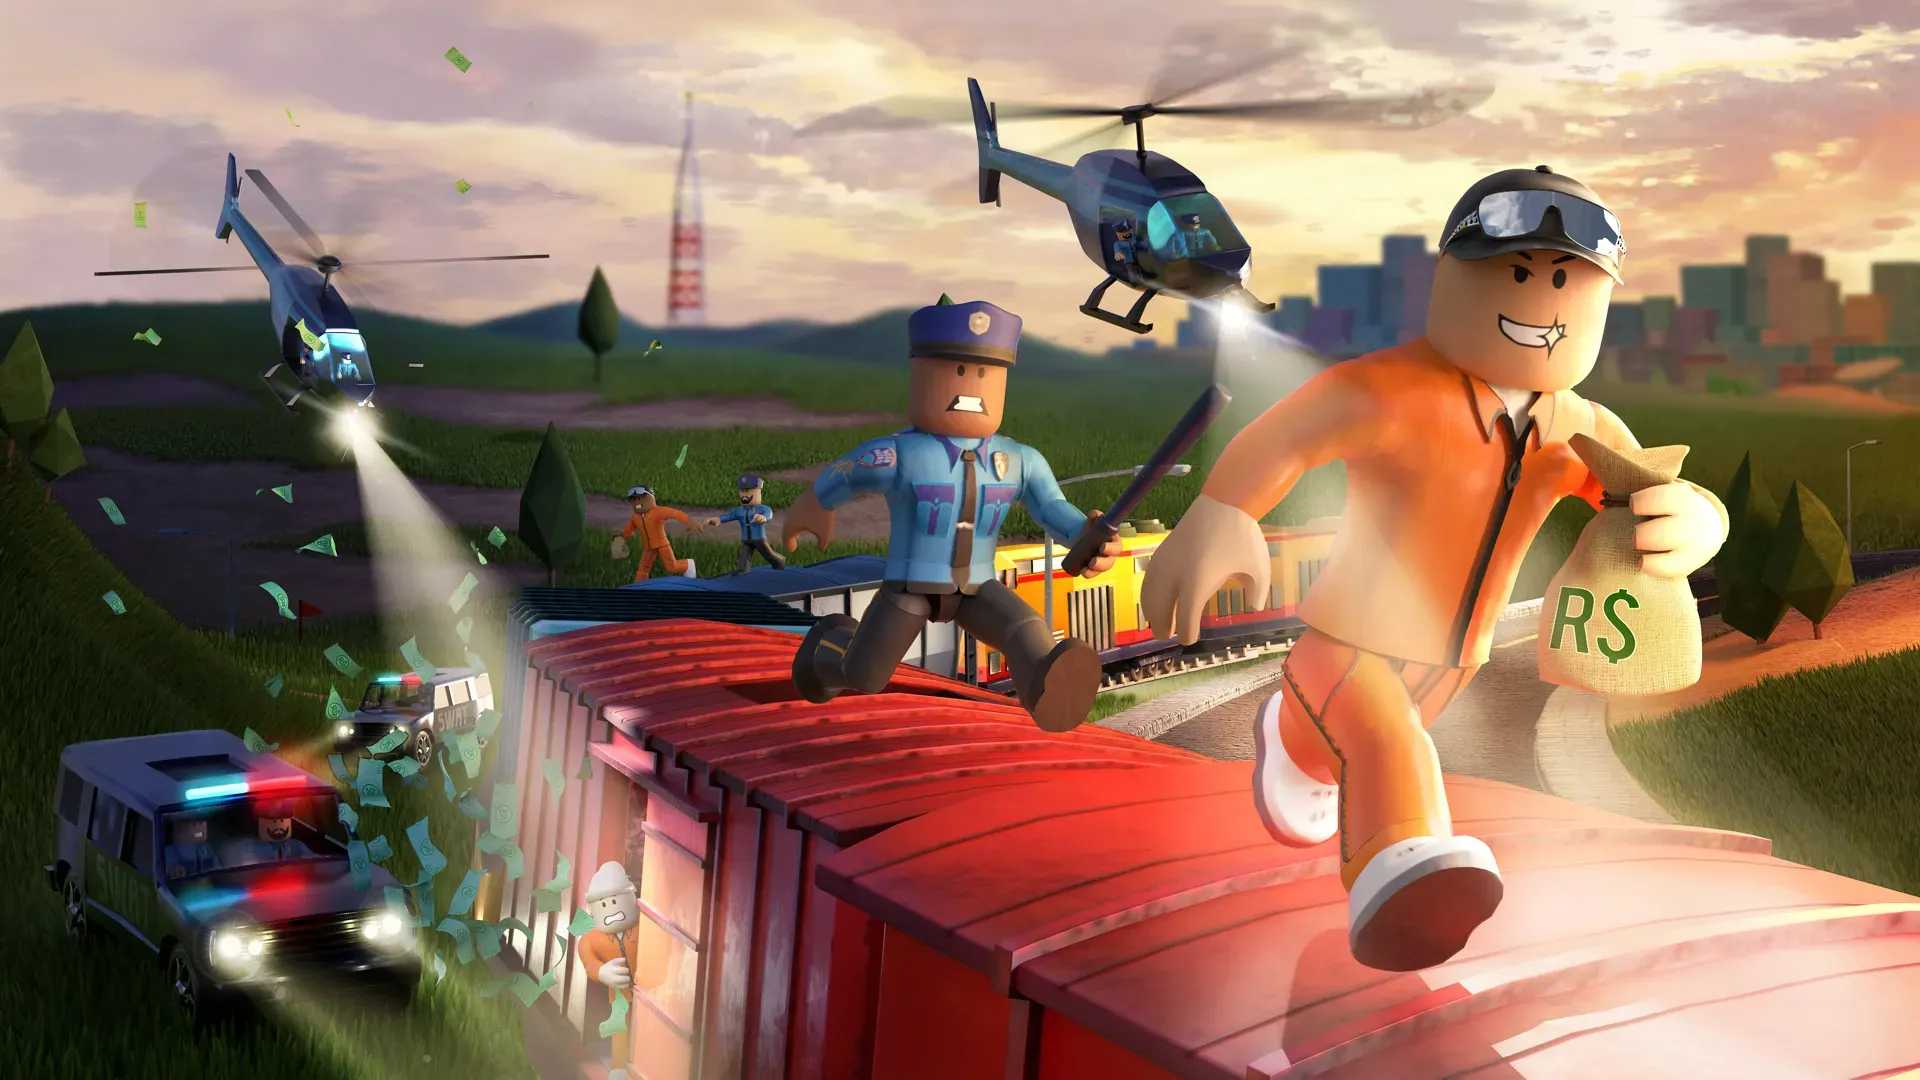 Hacker attempts to extort Roblox with stolen documents